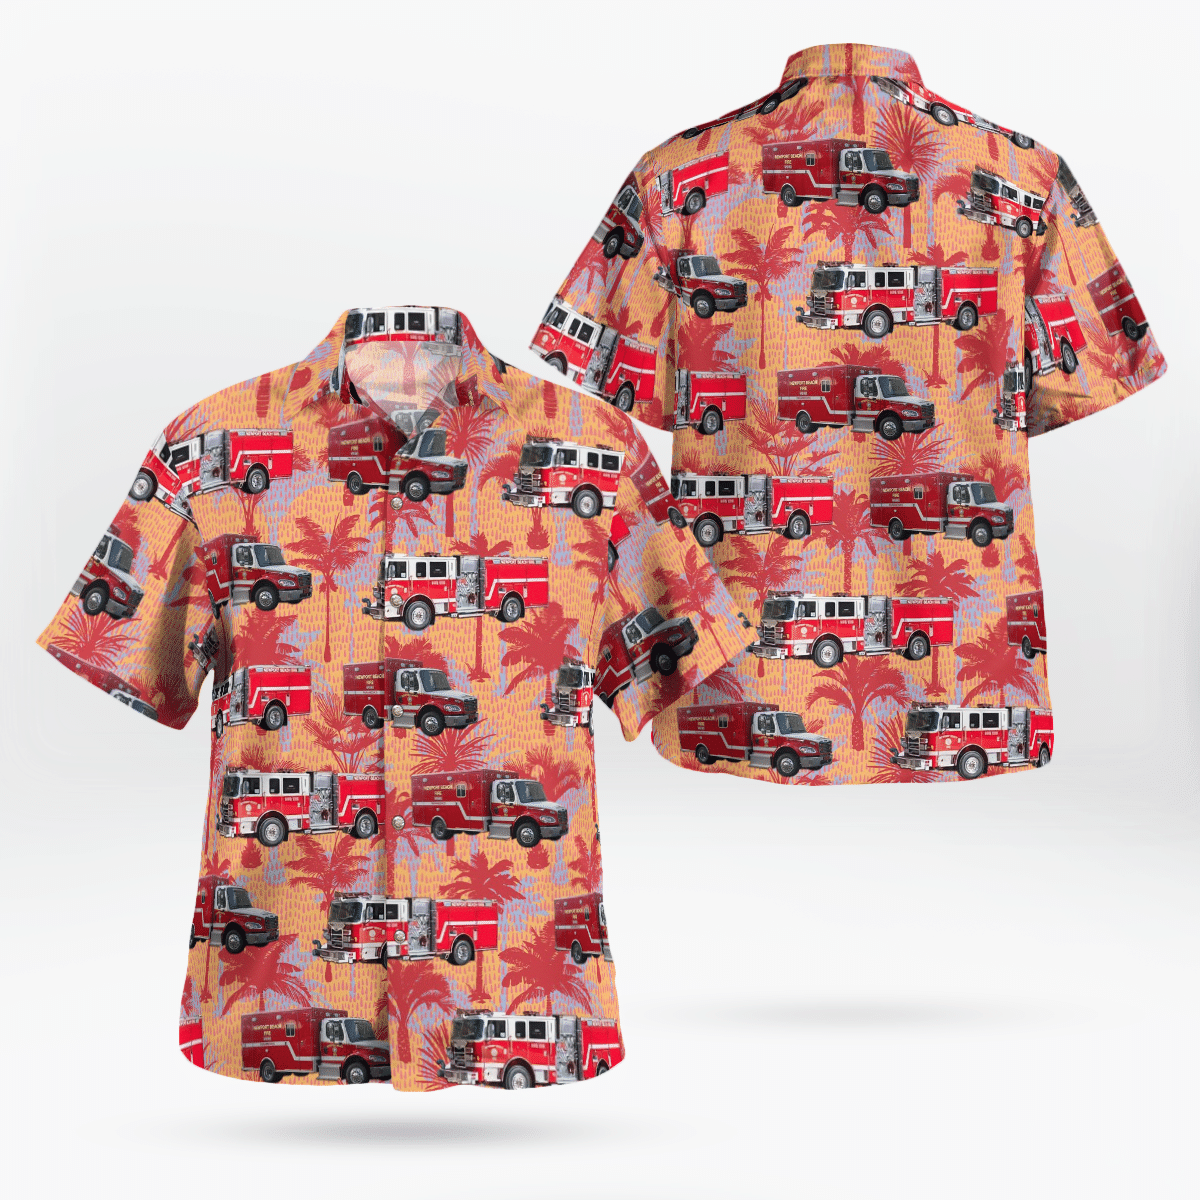 If you are in need of a new summertime look, pick up this Hawaiian shirt 113